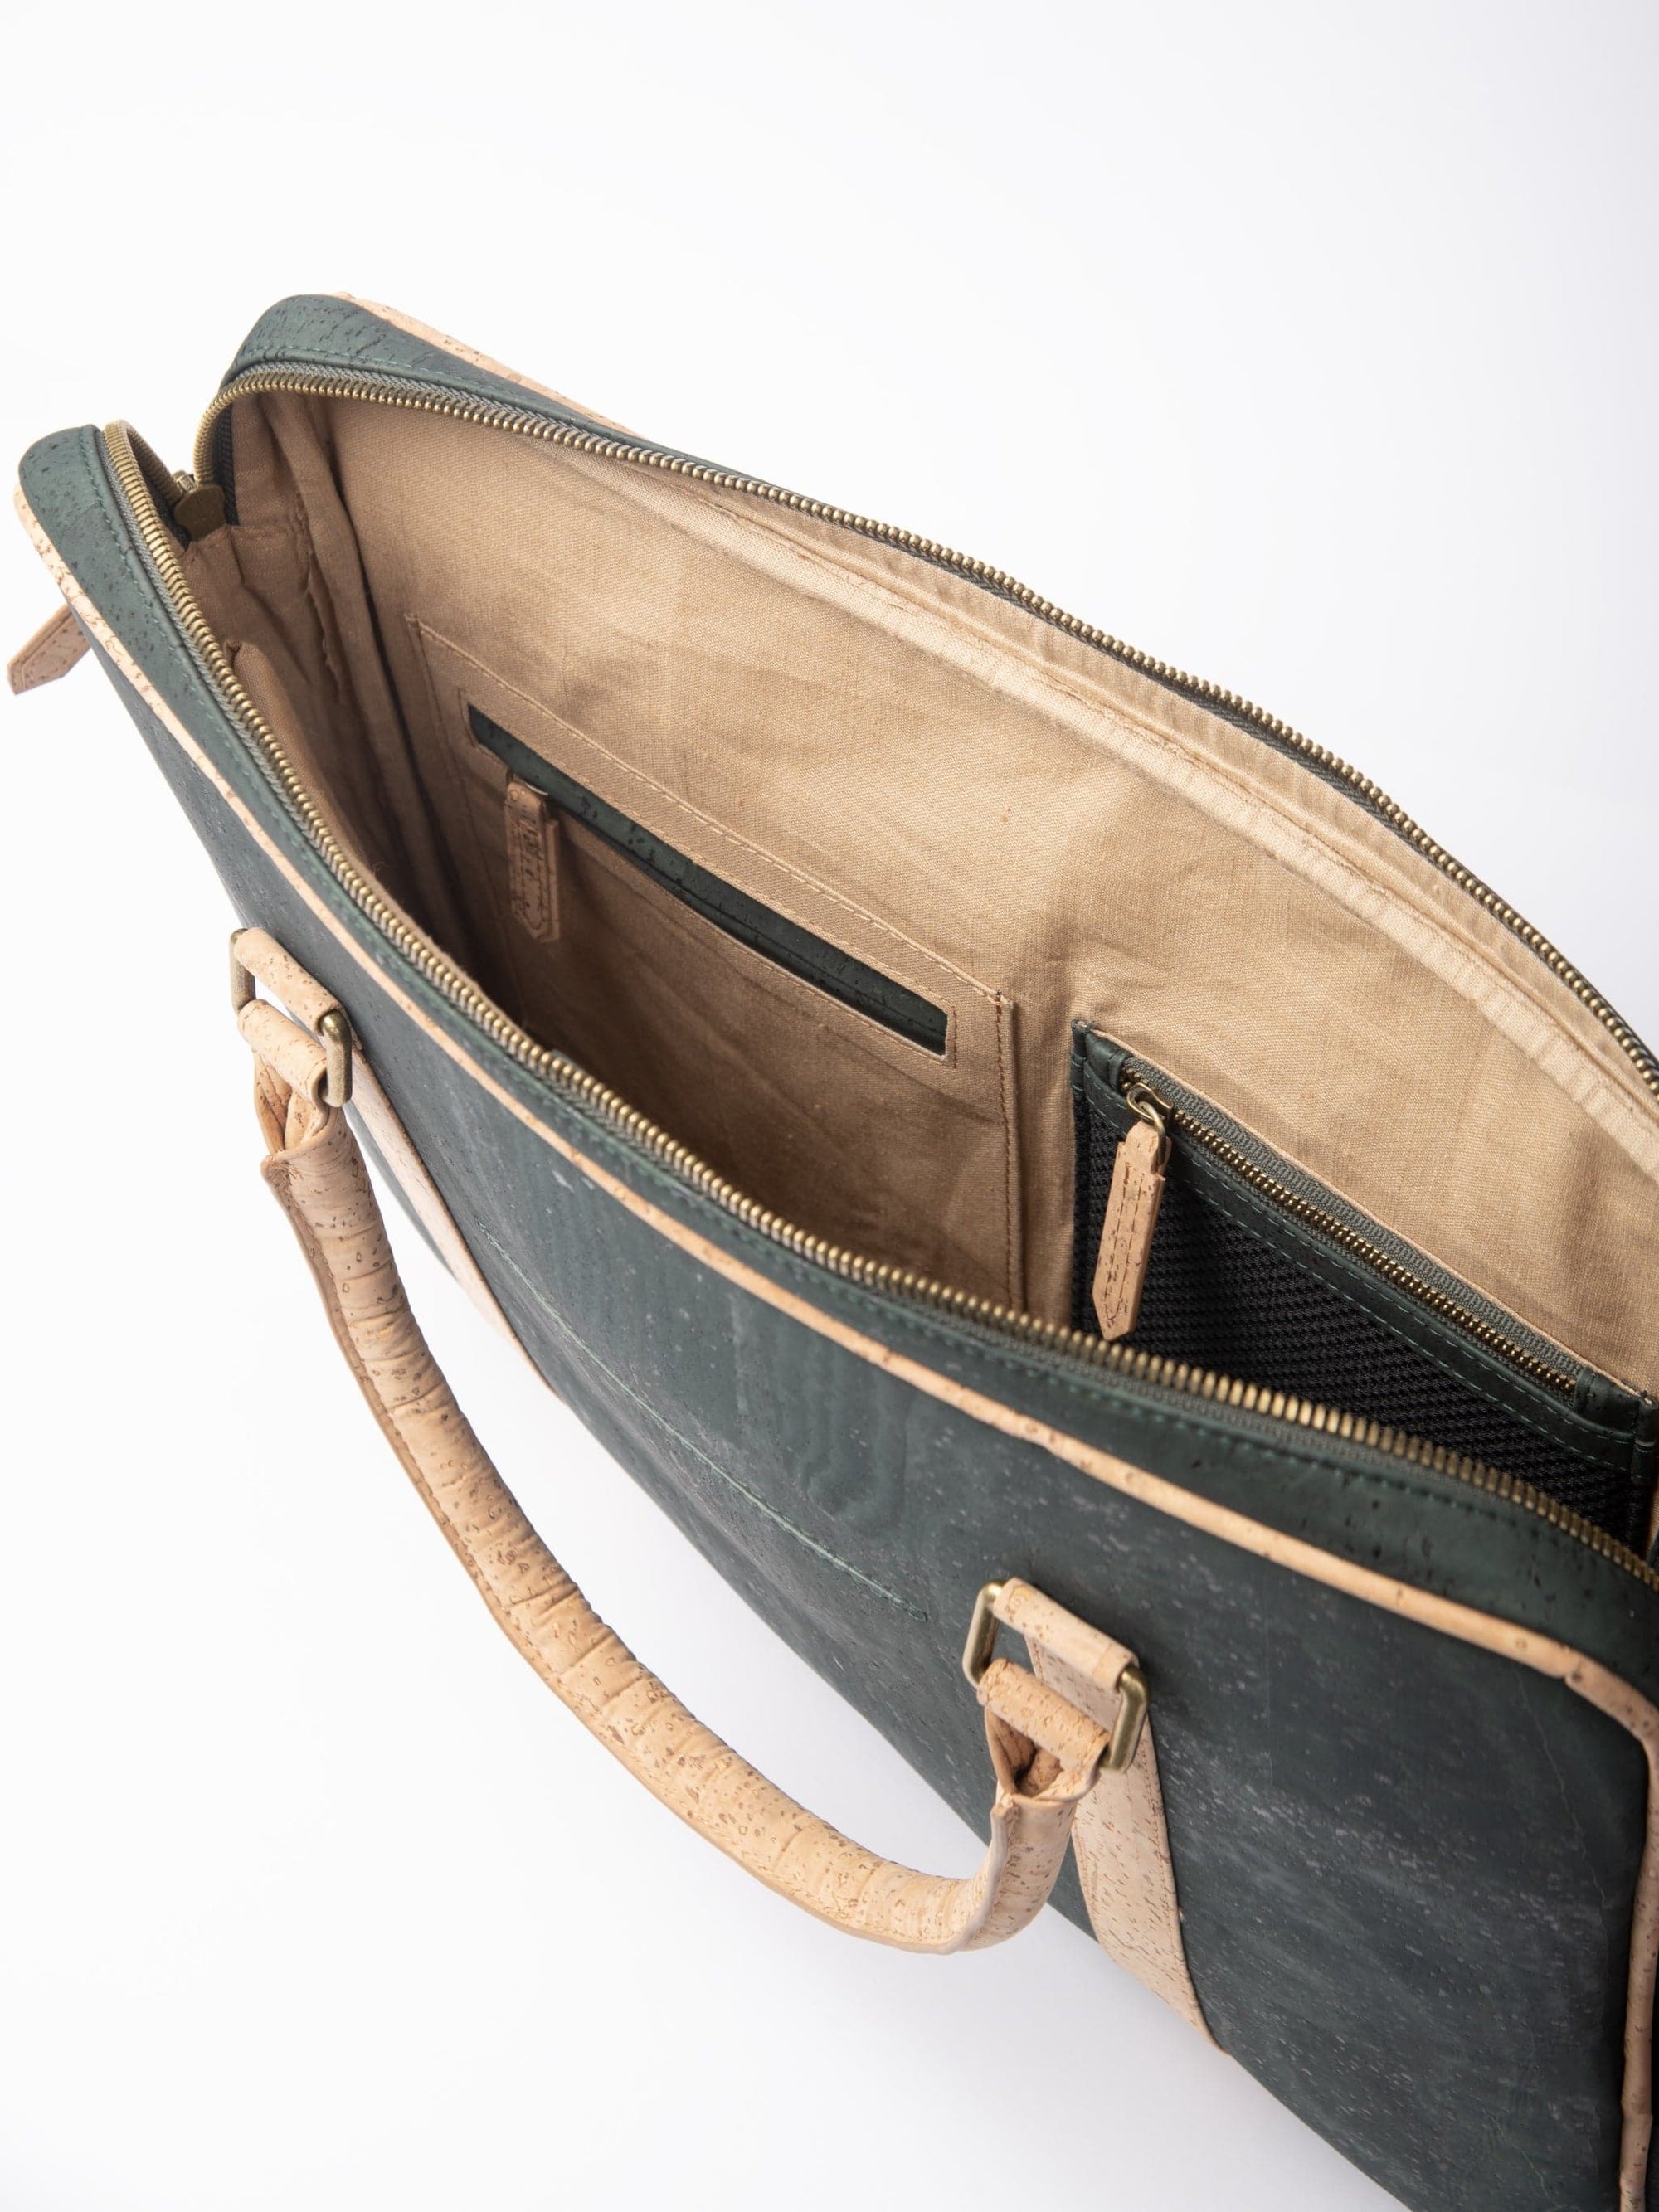 Slim Laptop Bag In Forest Green Cork -  KAAMNA